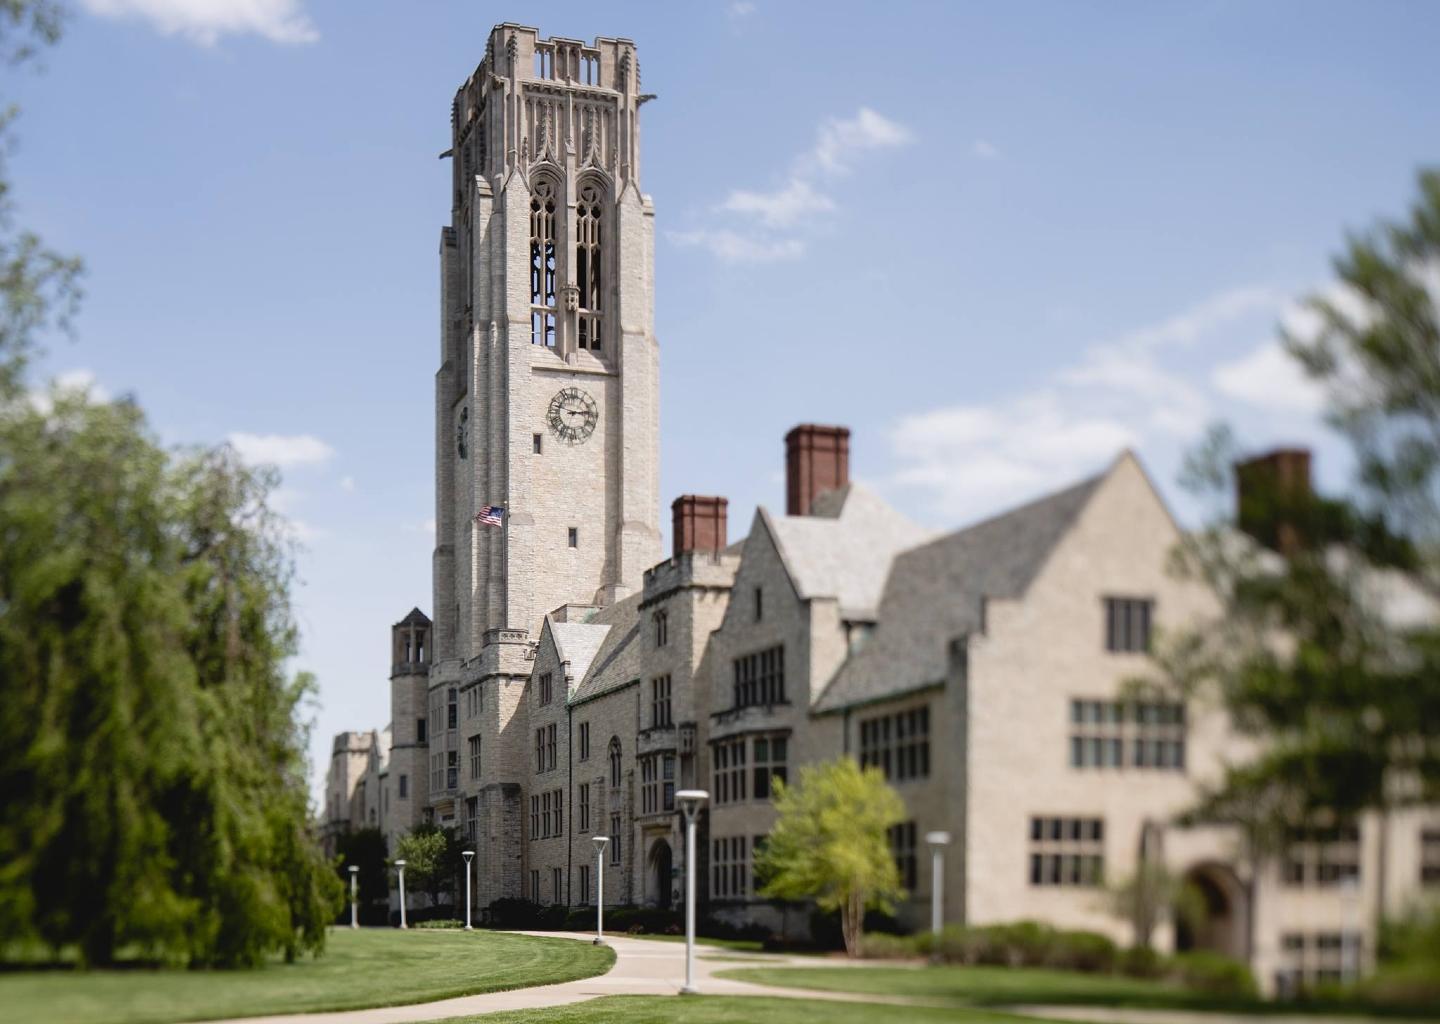 378 Courses Available at University of Toledo in United States. Apply